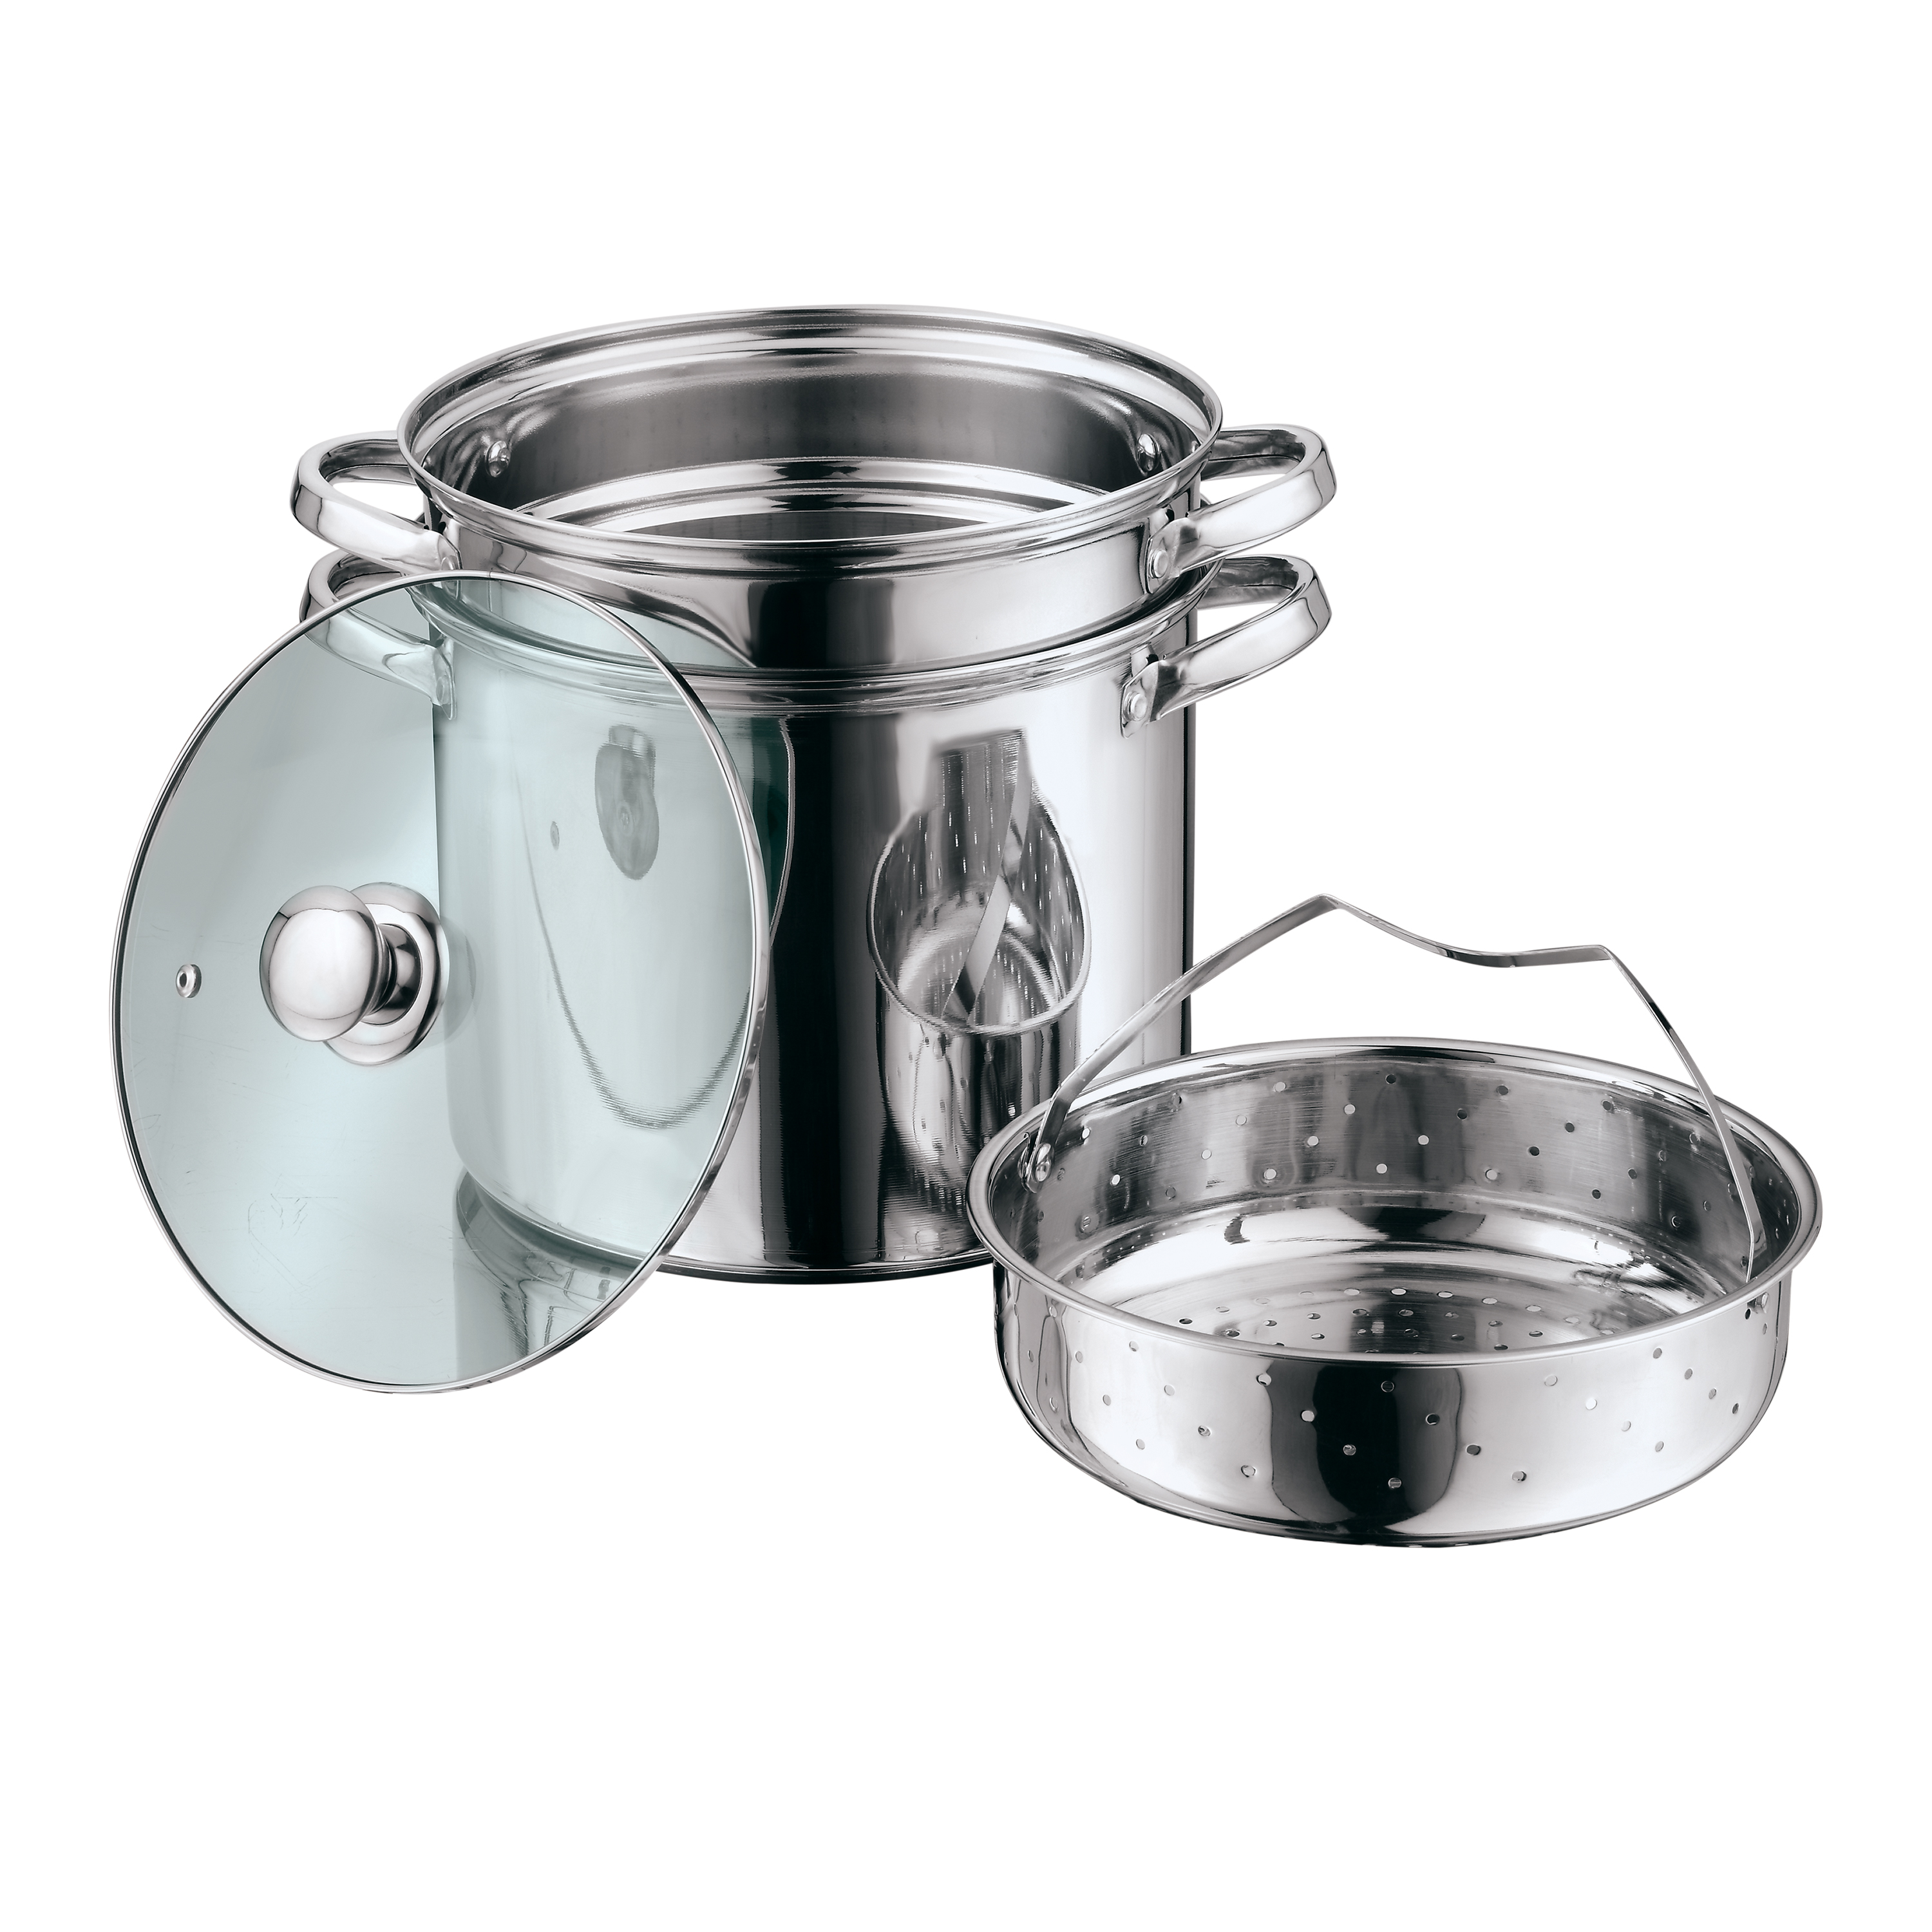 Mainstays Stainless Steel 8 Quart Multi-Cooker Stock pot with Lid - image 3 of 6